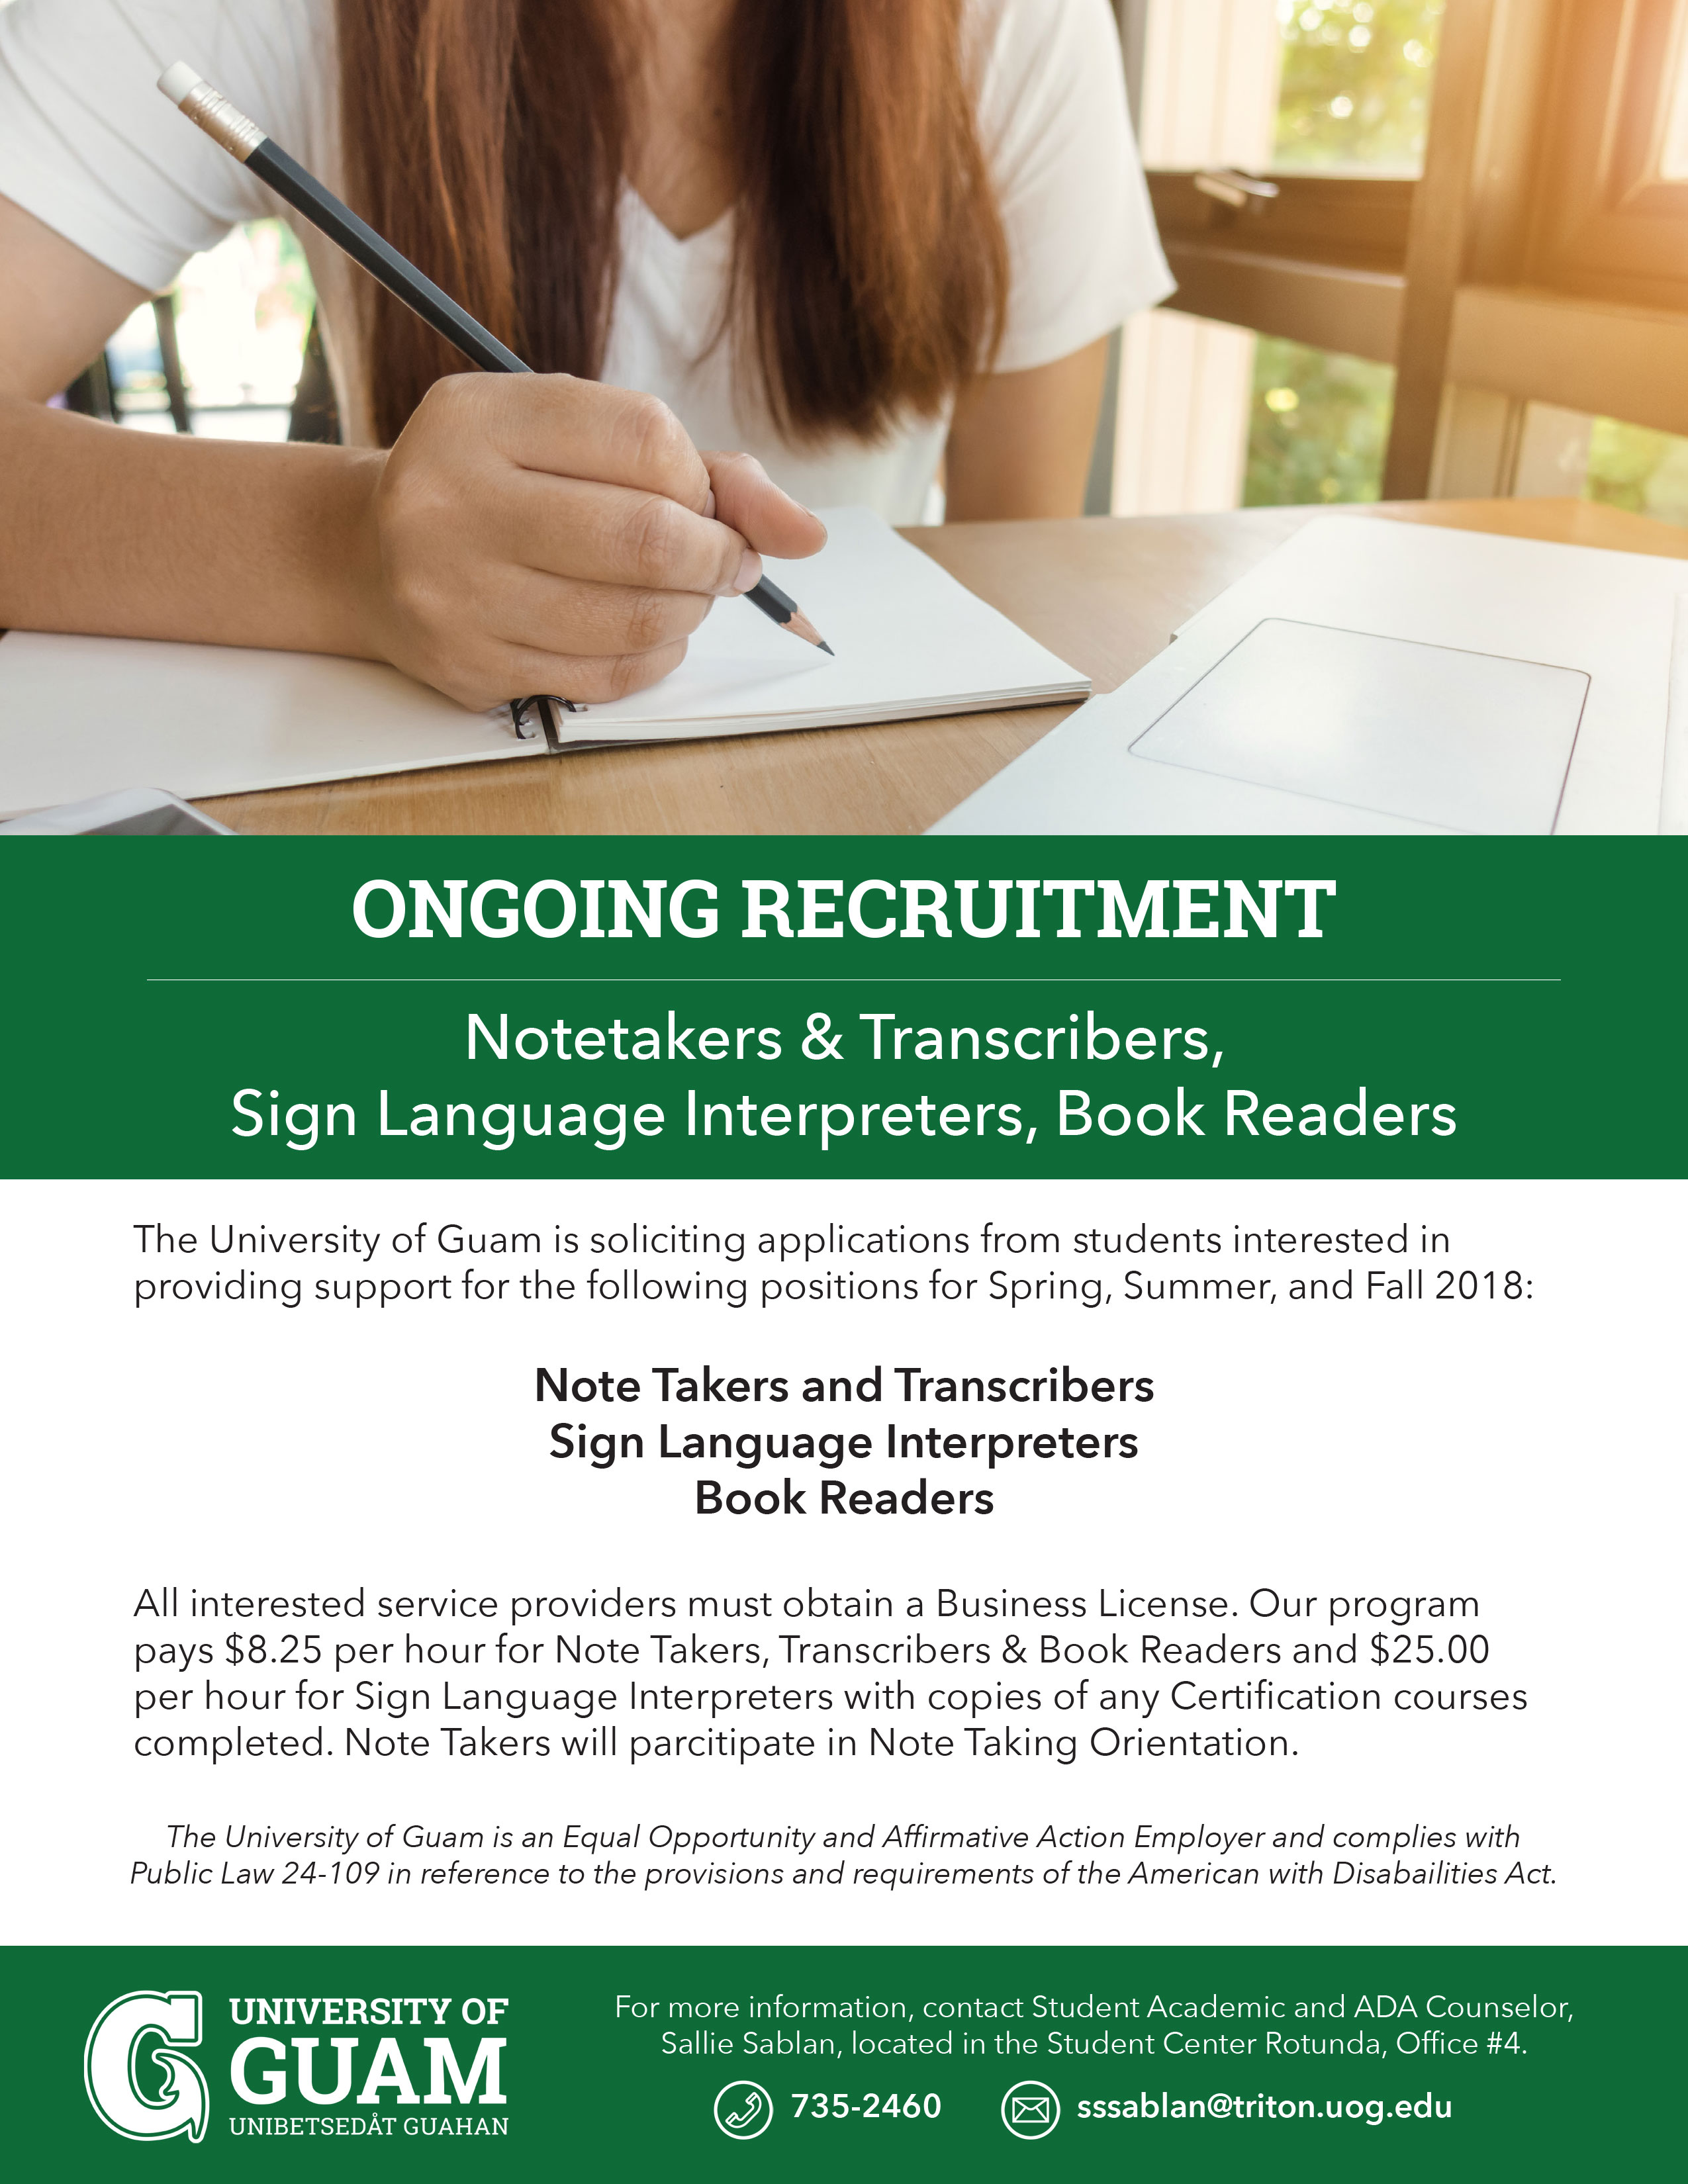 Recruitment for notetakers